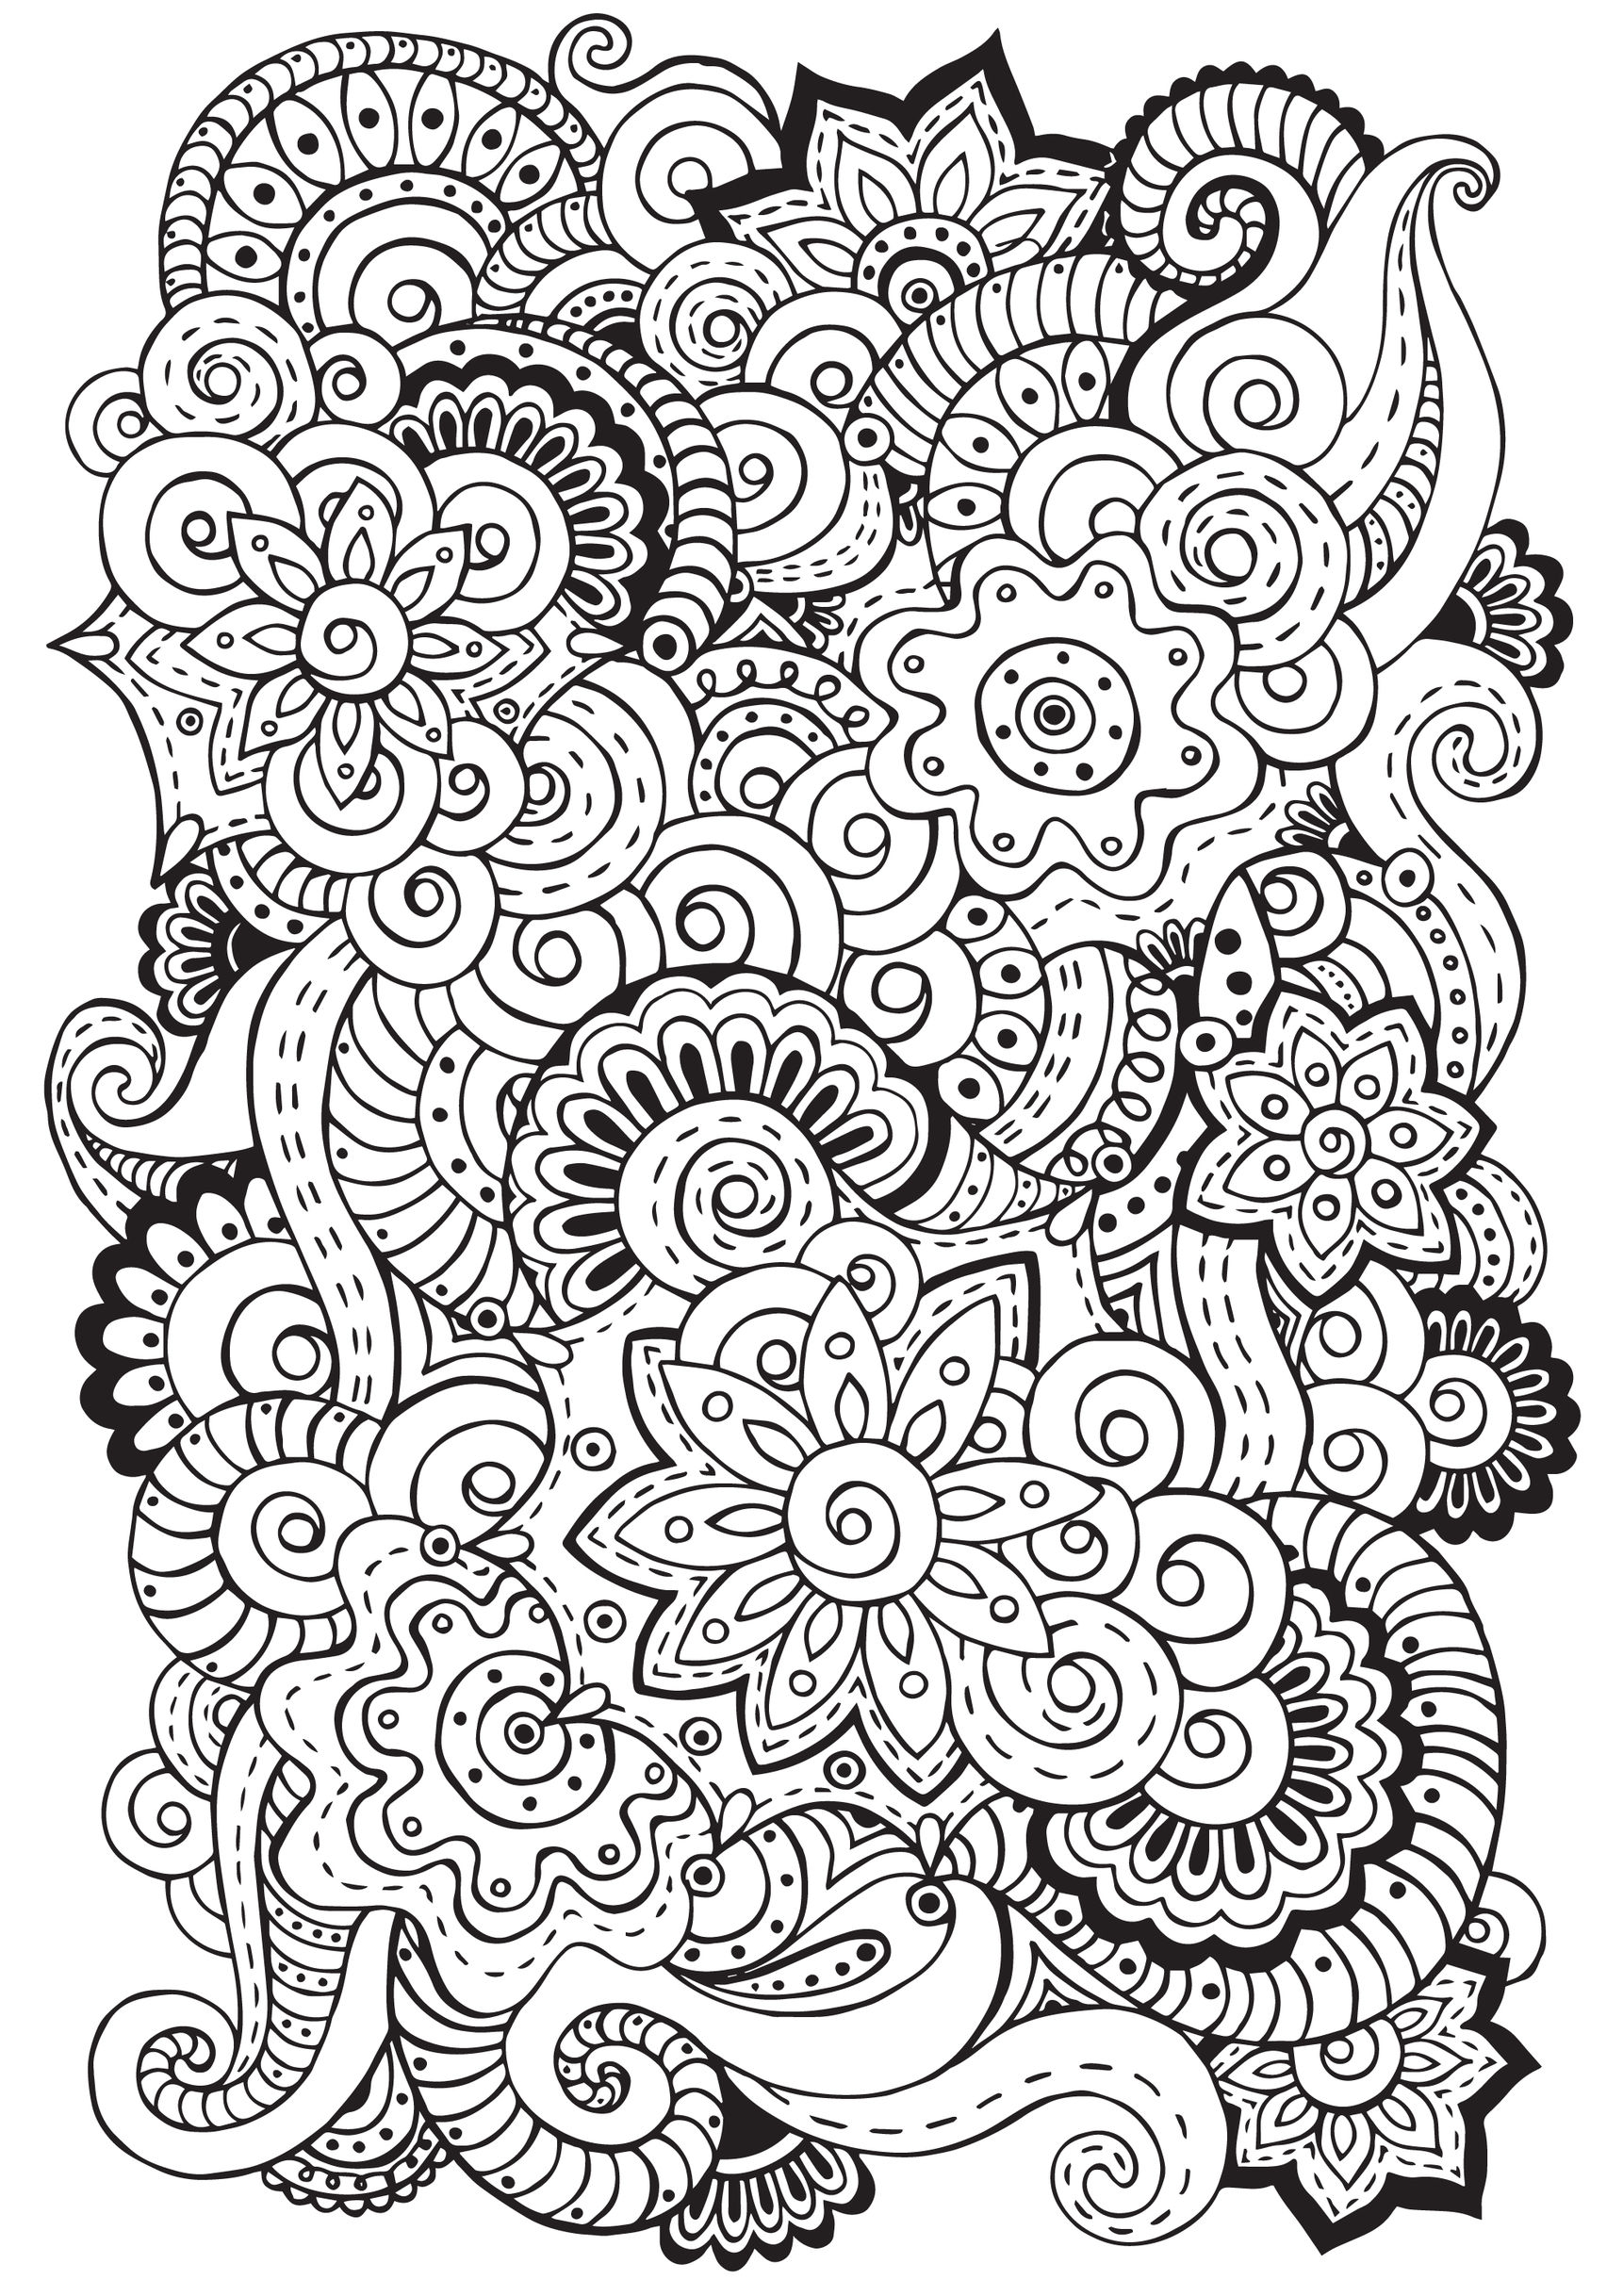 Mindful Meditation: The Art of Adult Coloring Books